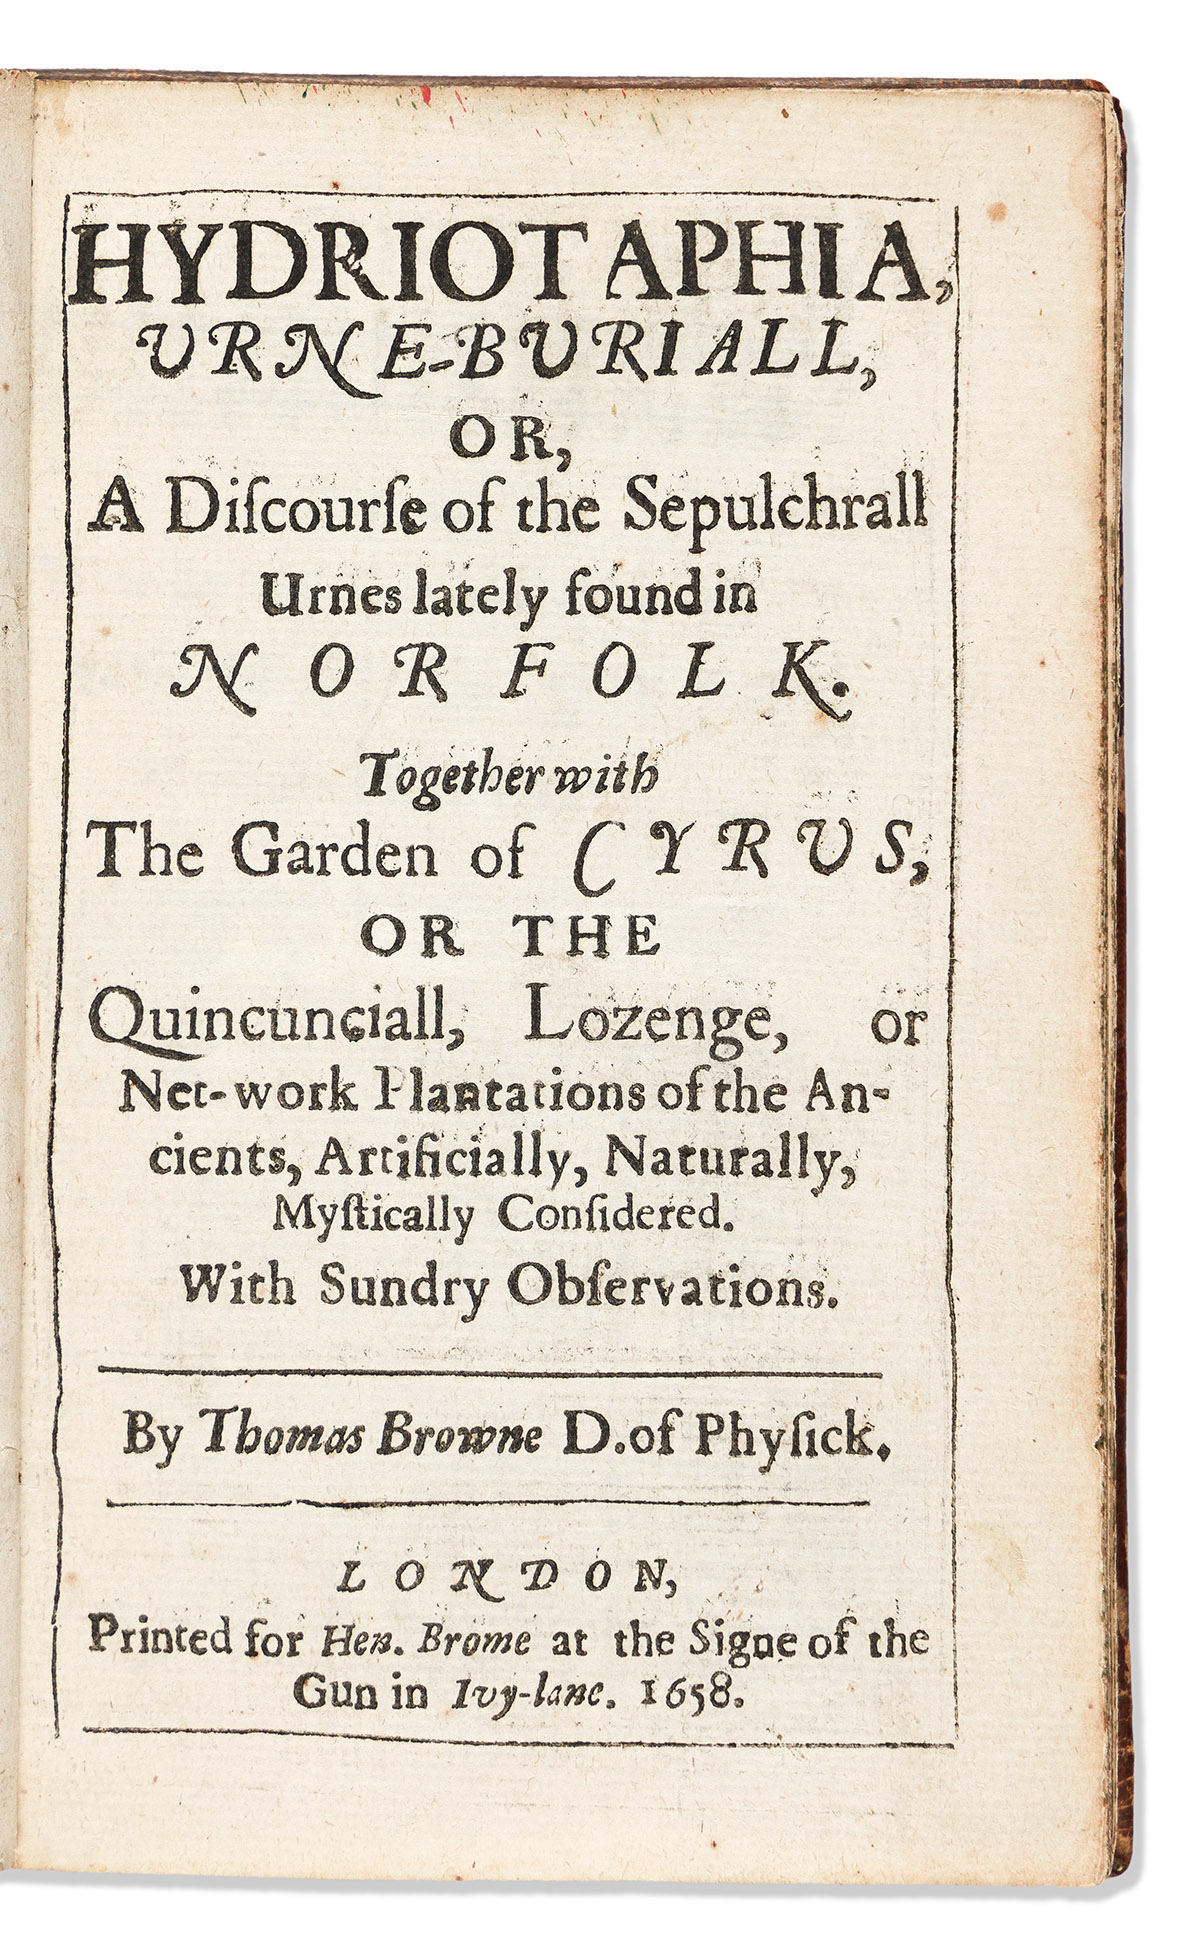 Browne, Thomas (1605-1682) Hydriotaphia, Urne-Buriall, or, A Discourse of the Sepulchral Urnes Lately Found in Norfolk. Together with T